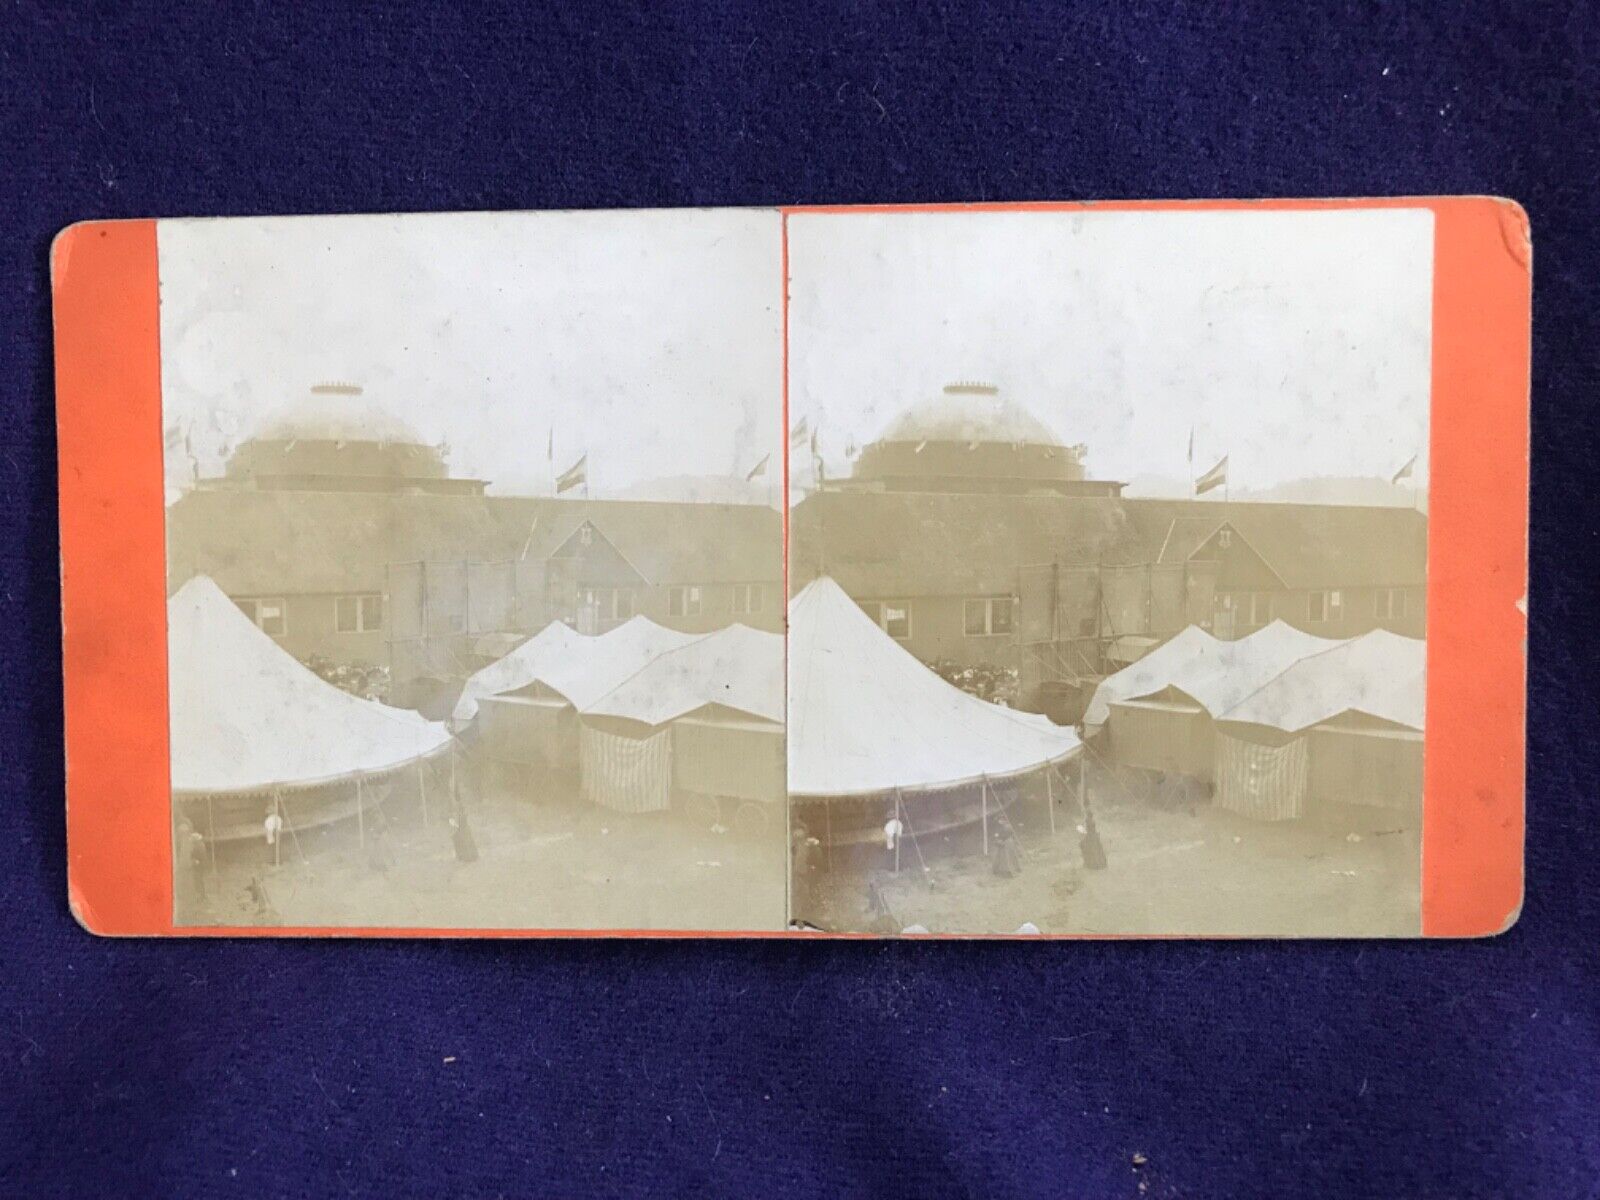 ANTIQUE 2 SIDED REAL PHOTO STEREOVIEW CARD SYRACUSE NEW YORK STATE FAIR